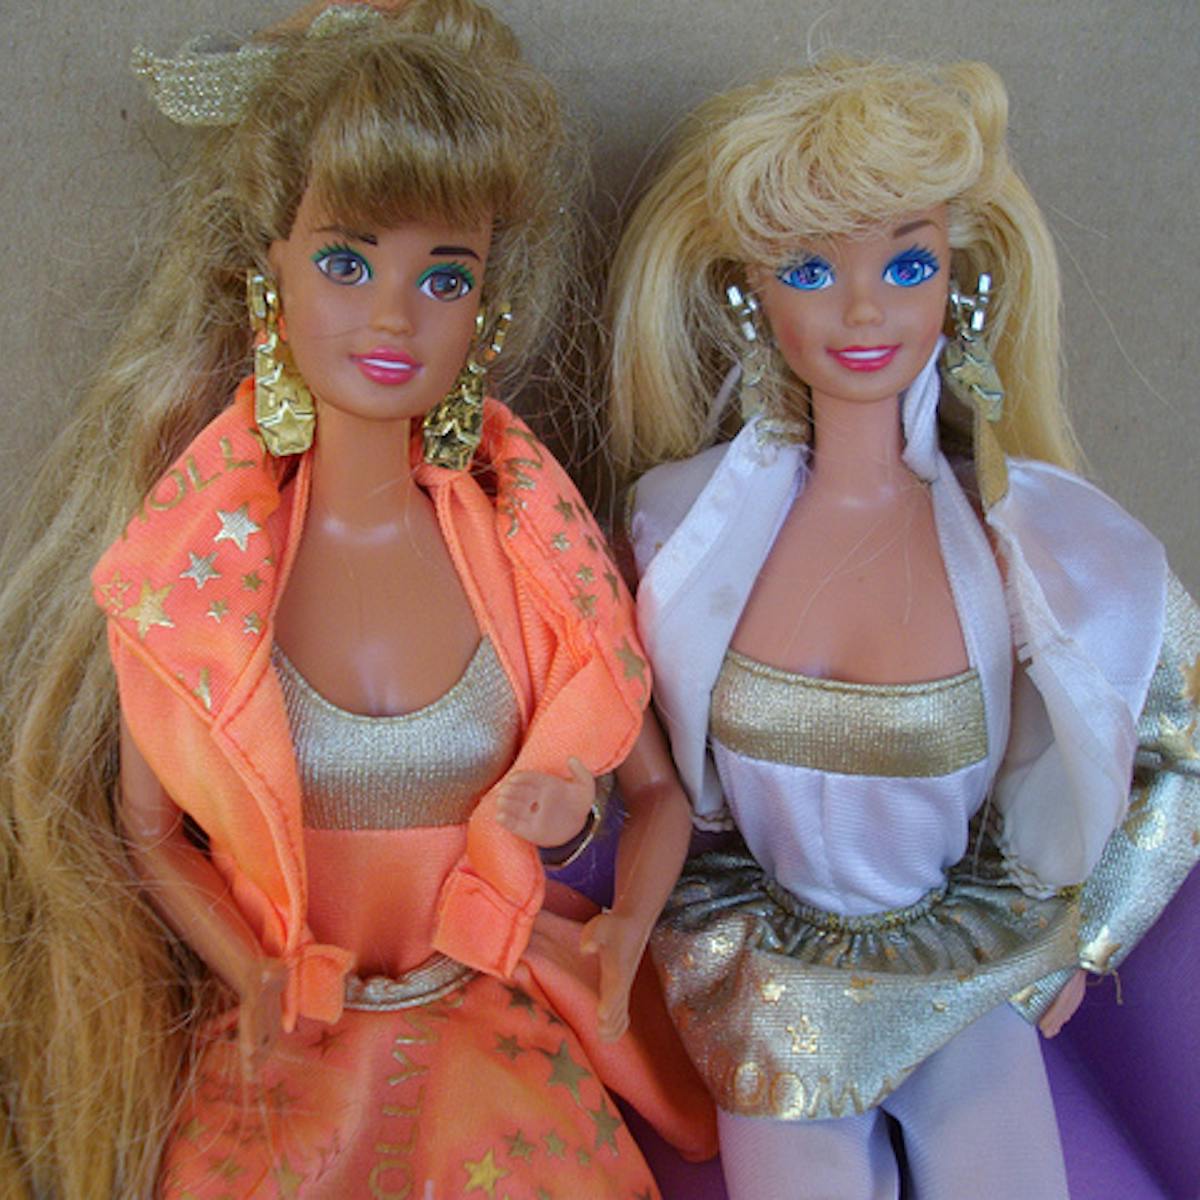 Is Barbie bad for body image?